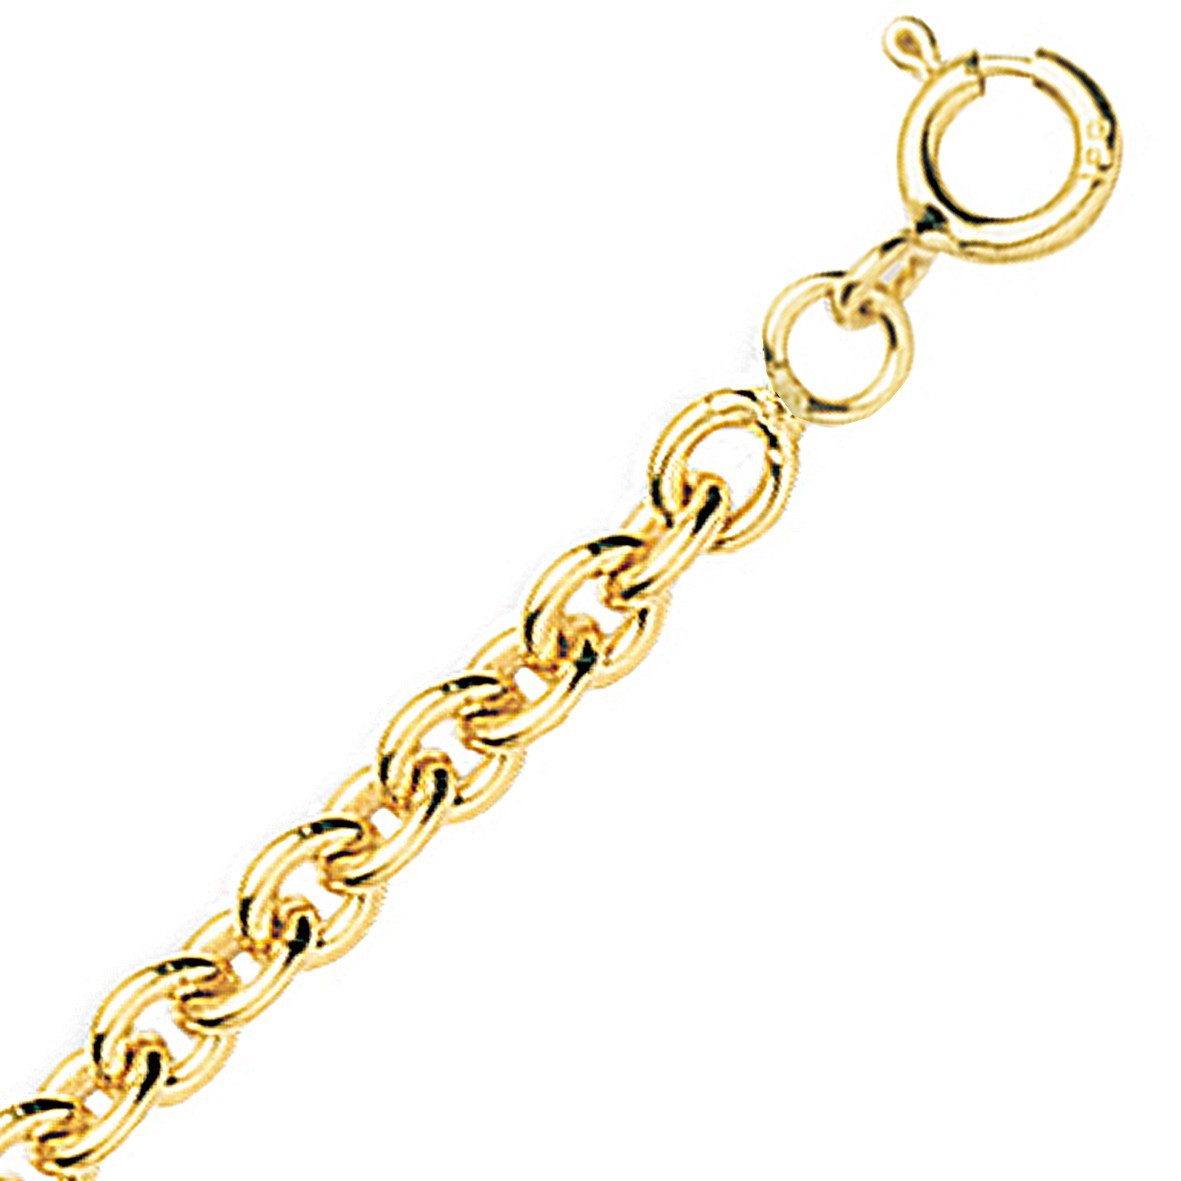 Chaine or jaune 18k maille forçat ronde 2.85mm